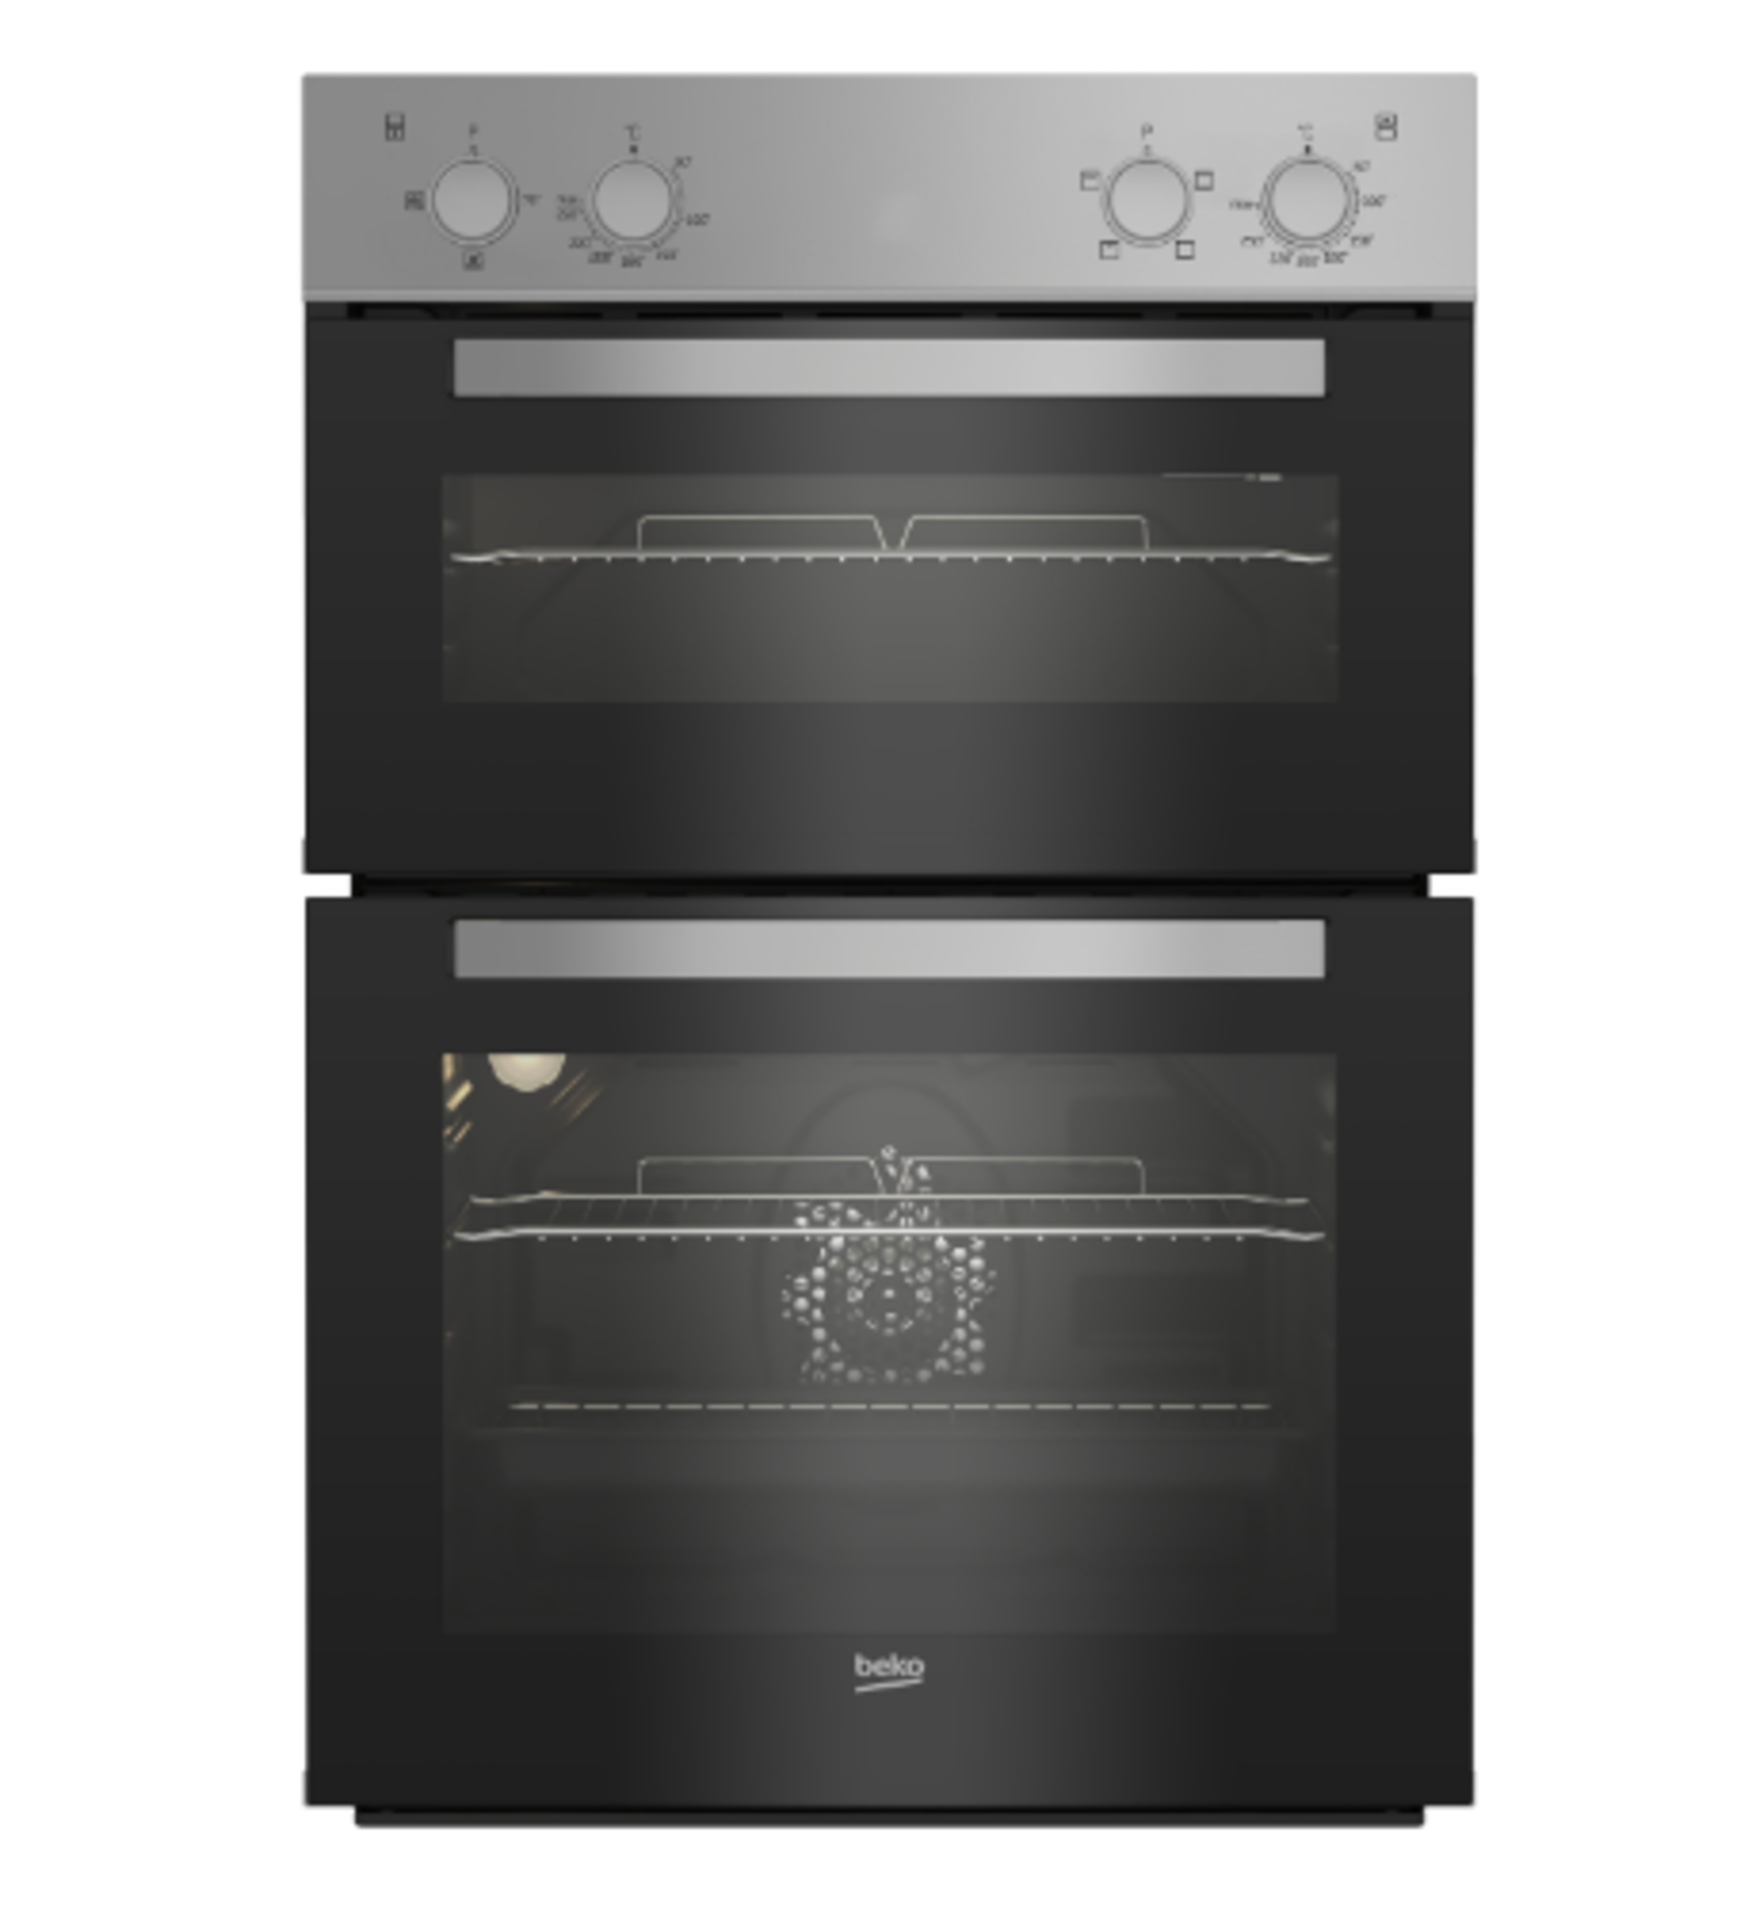 Beko BXDF21000S Electric Double Oven - Silver RRP £219.99 (52)